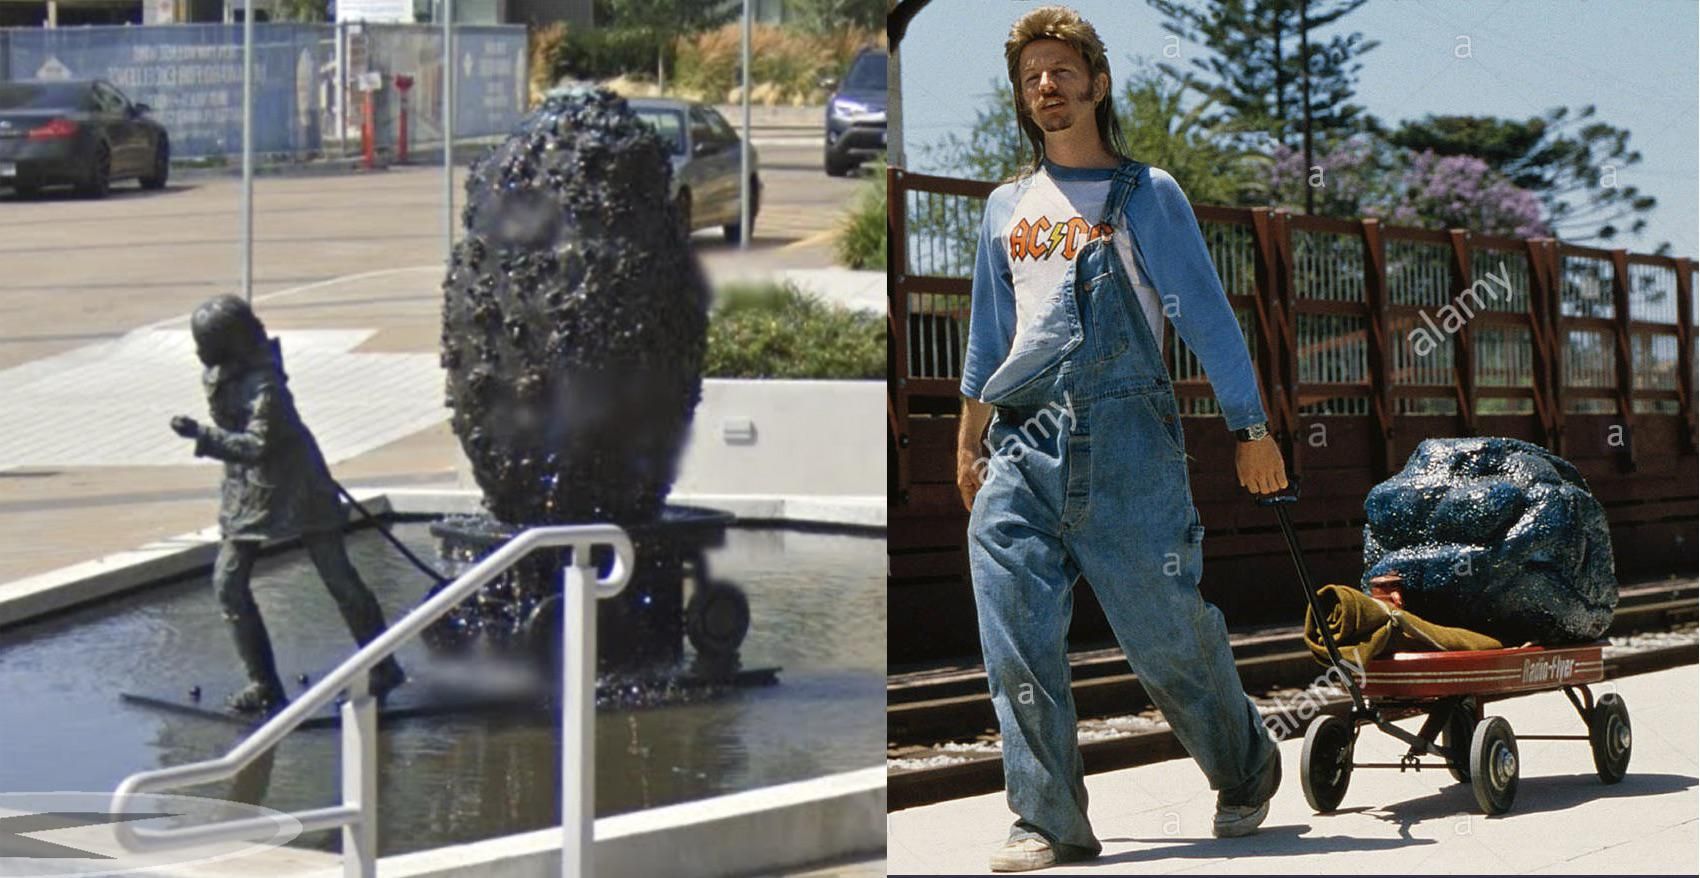 So I drove by a new statue in my city the other day and it seemed super familiar.